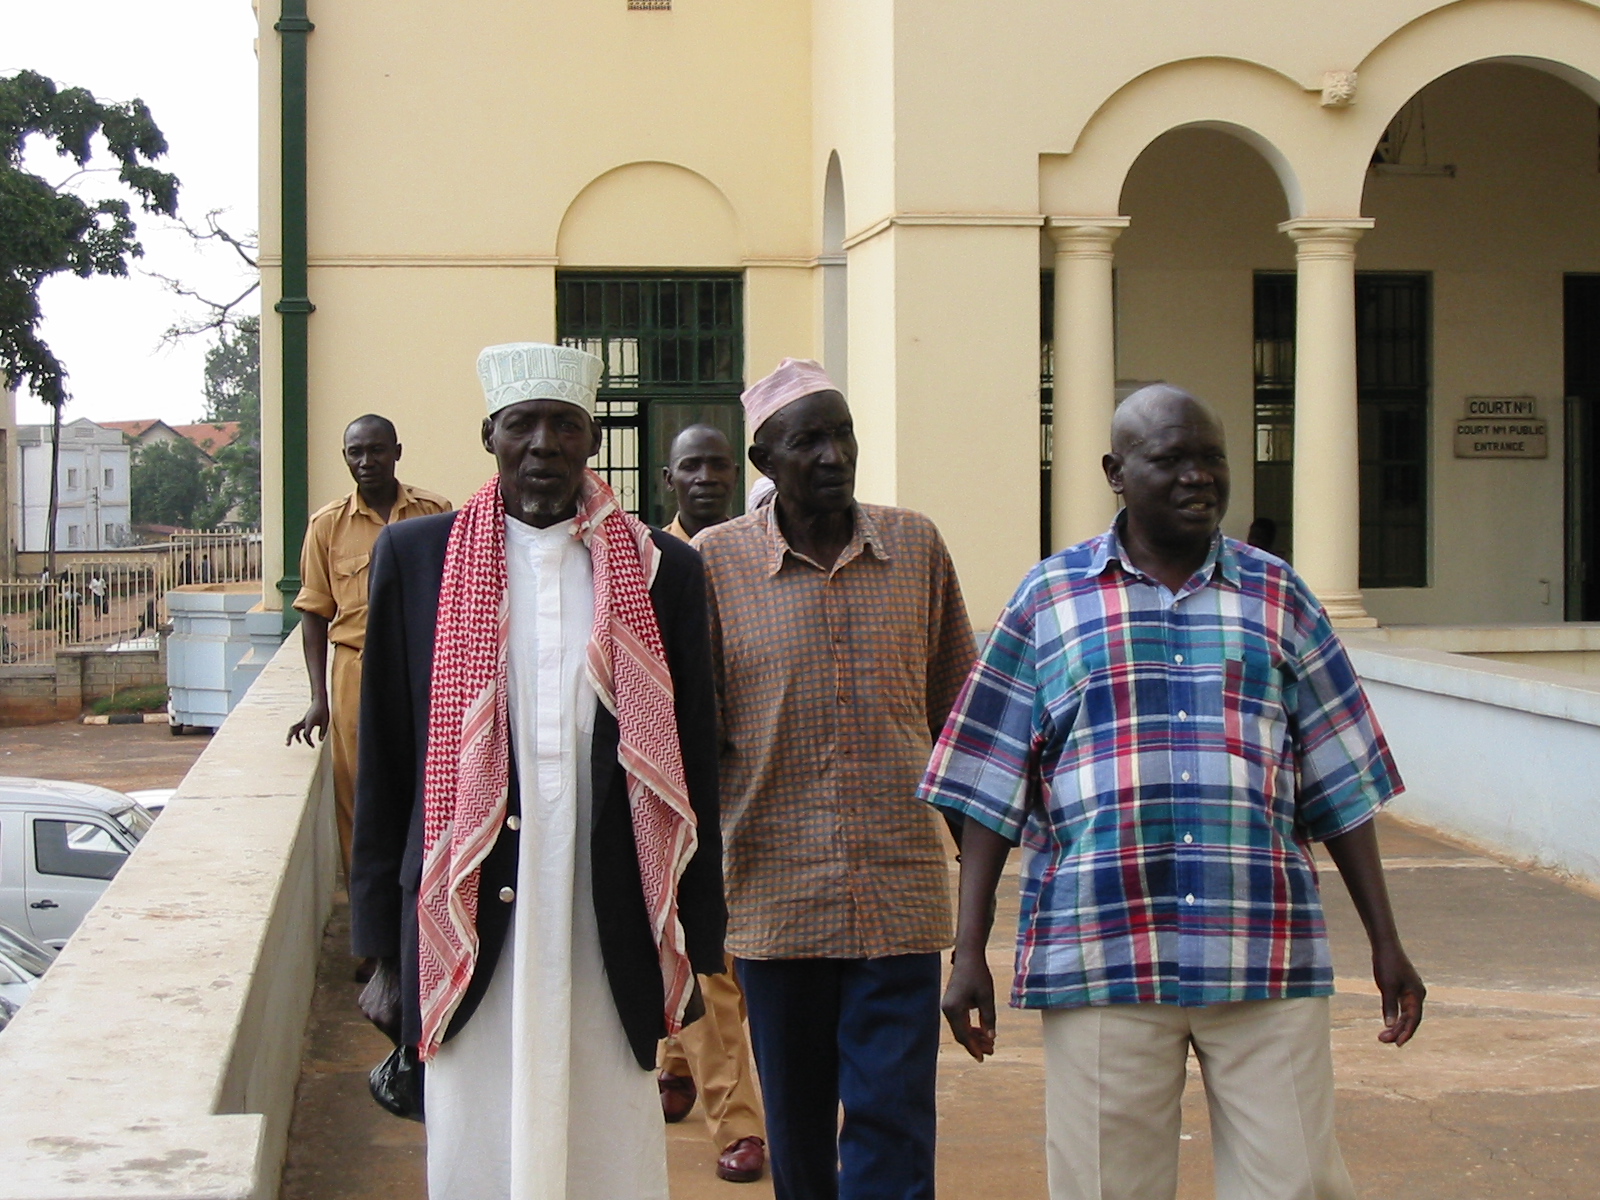  The accused (from left): Mohammed Anyule, Nasur Gille, Yusuf Gowon (Andrew Rice) 